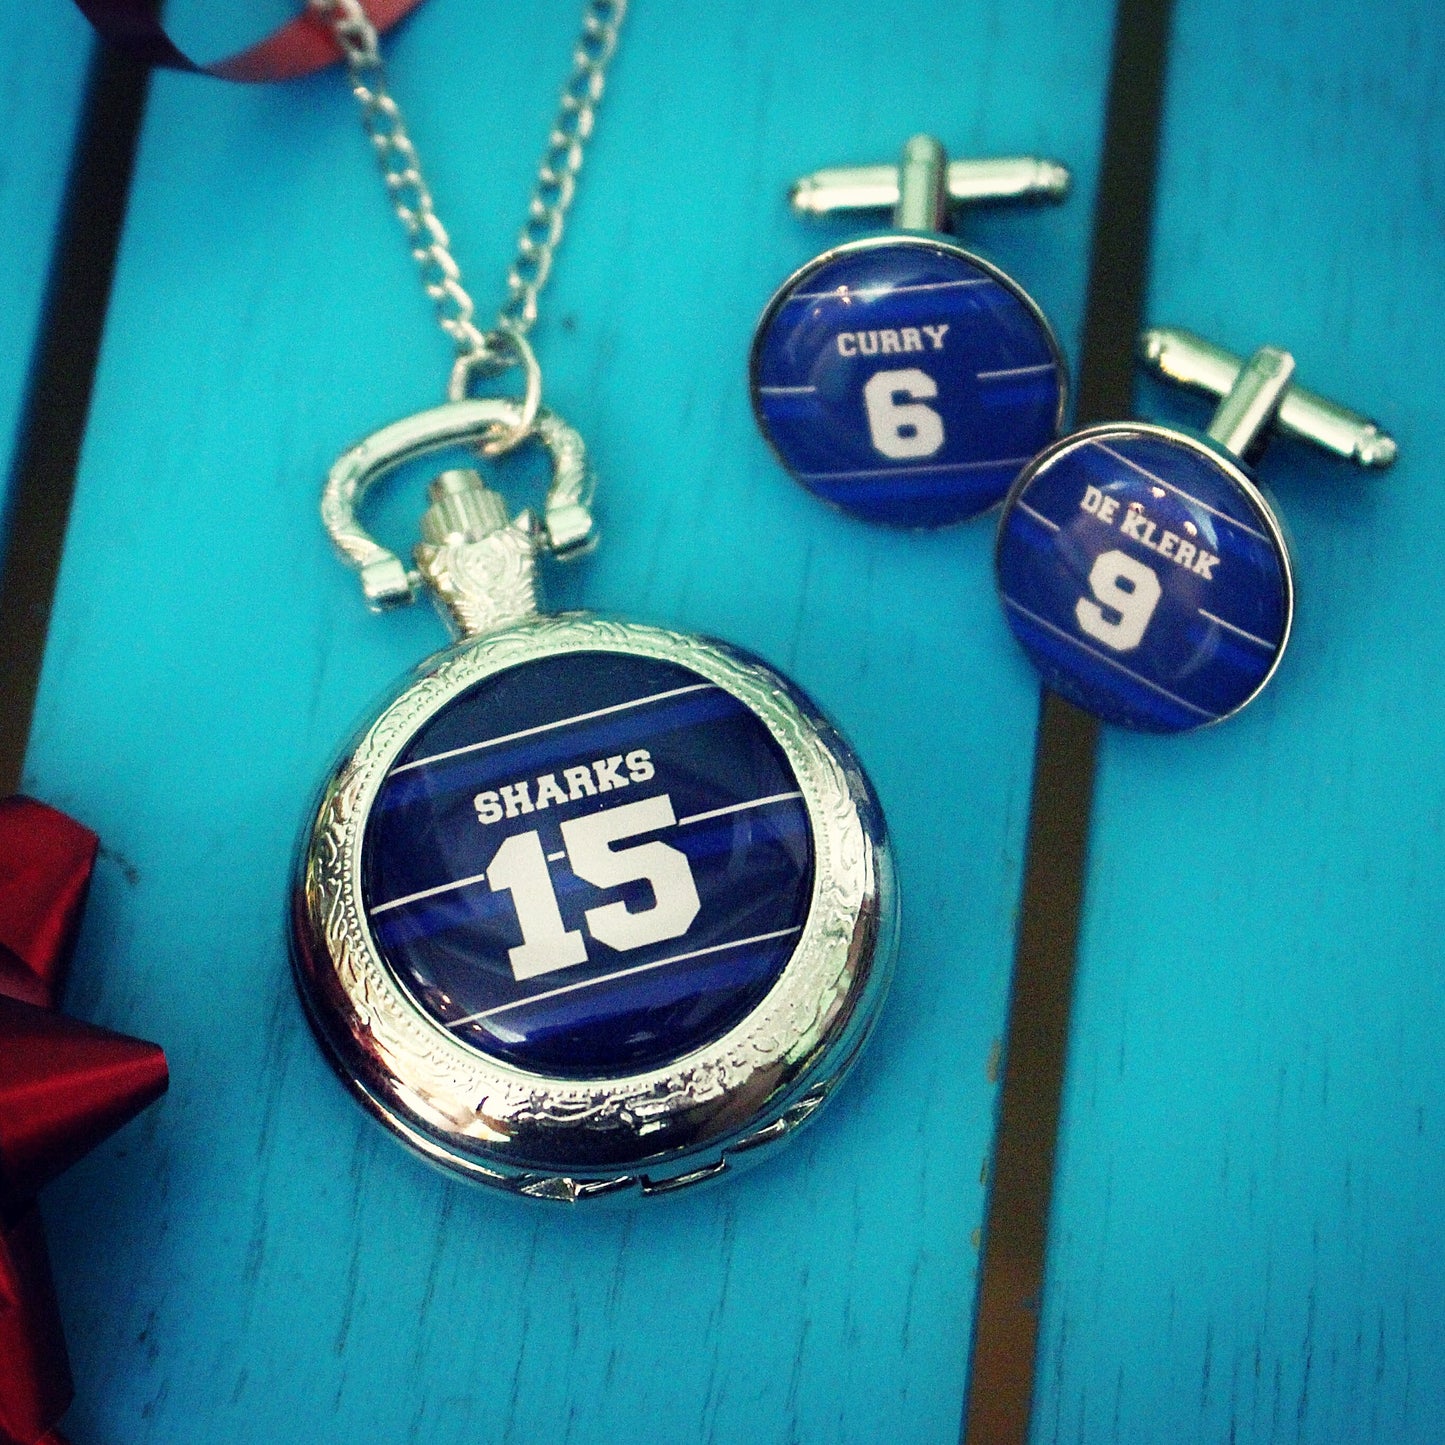 Sale Sharks Rugby Pocket Watch. Personalised gift for rugby fan. Christmas present for him. Premiership Rugby Sports shirt Your name. Dad.